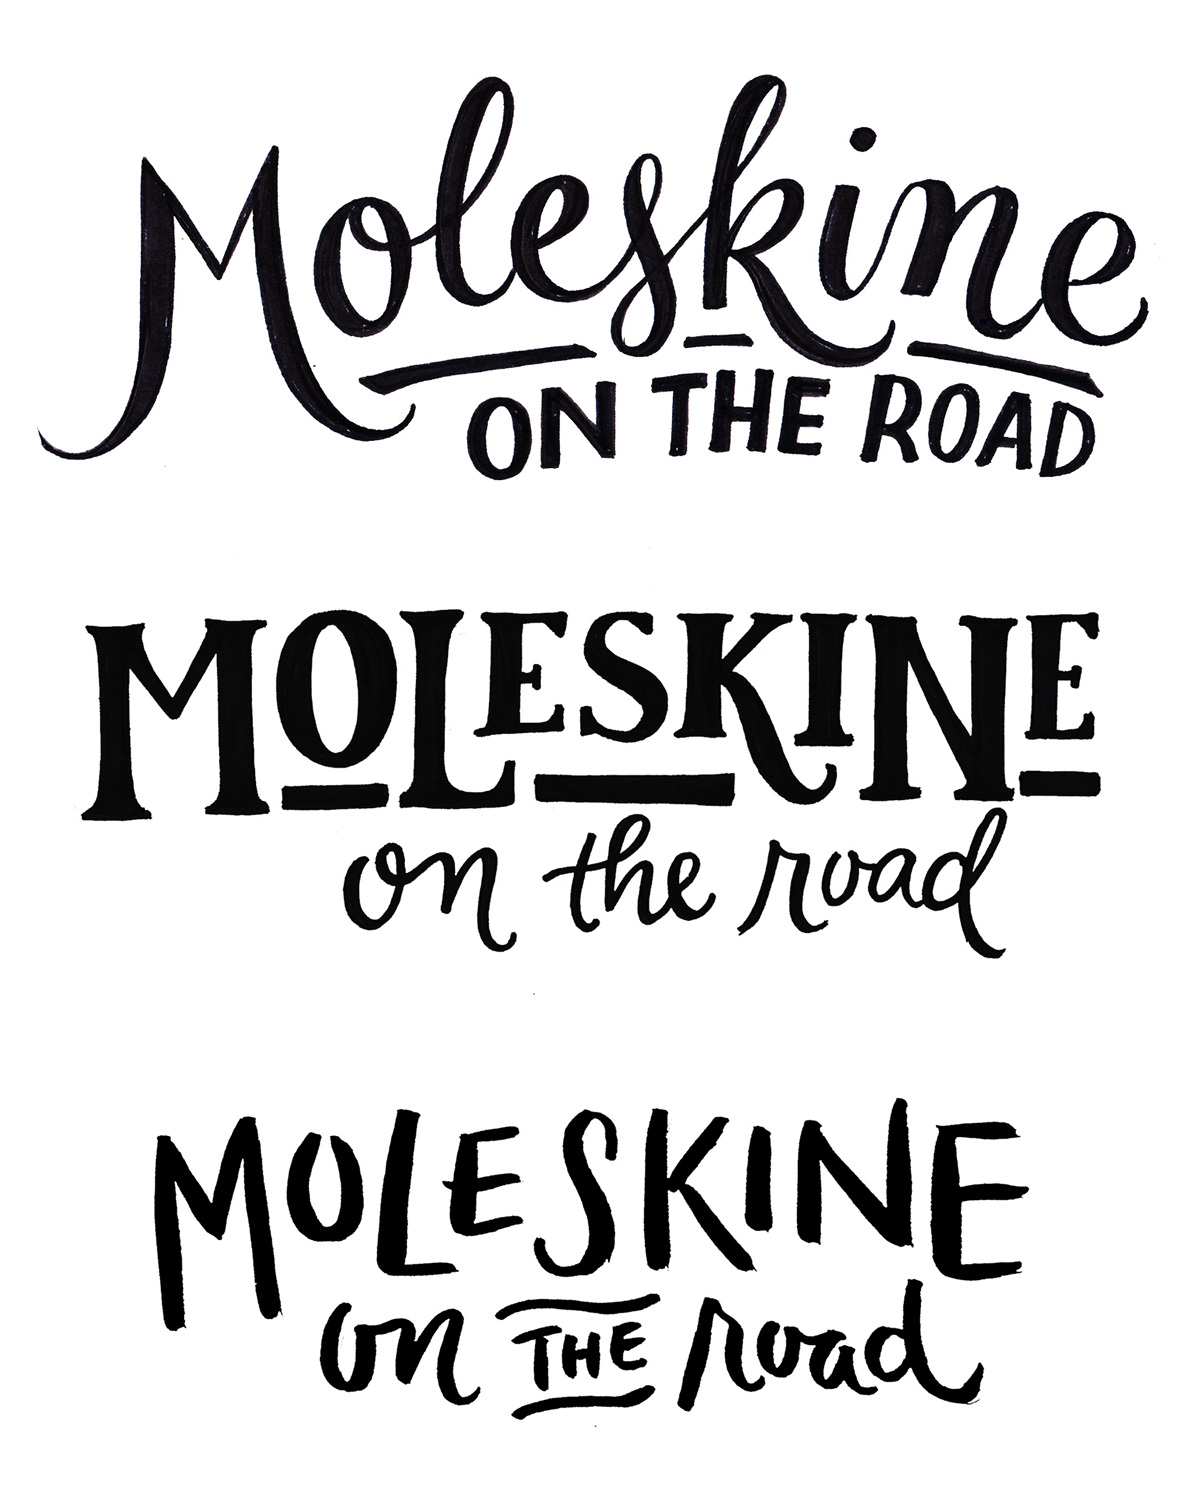 Travel moleskine On the road moment collecting map jetsetter rustic adventure Workshop poster online collaterals abbey sy mikka wee HAND LETTERING